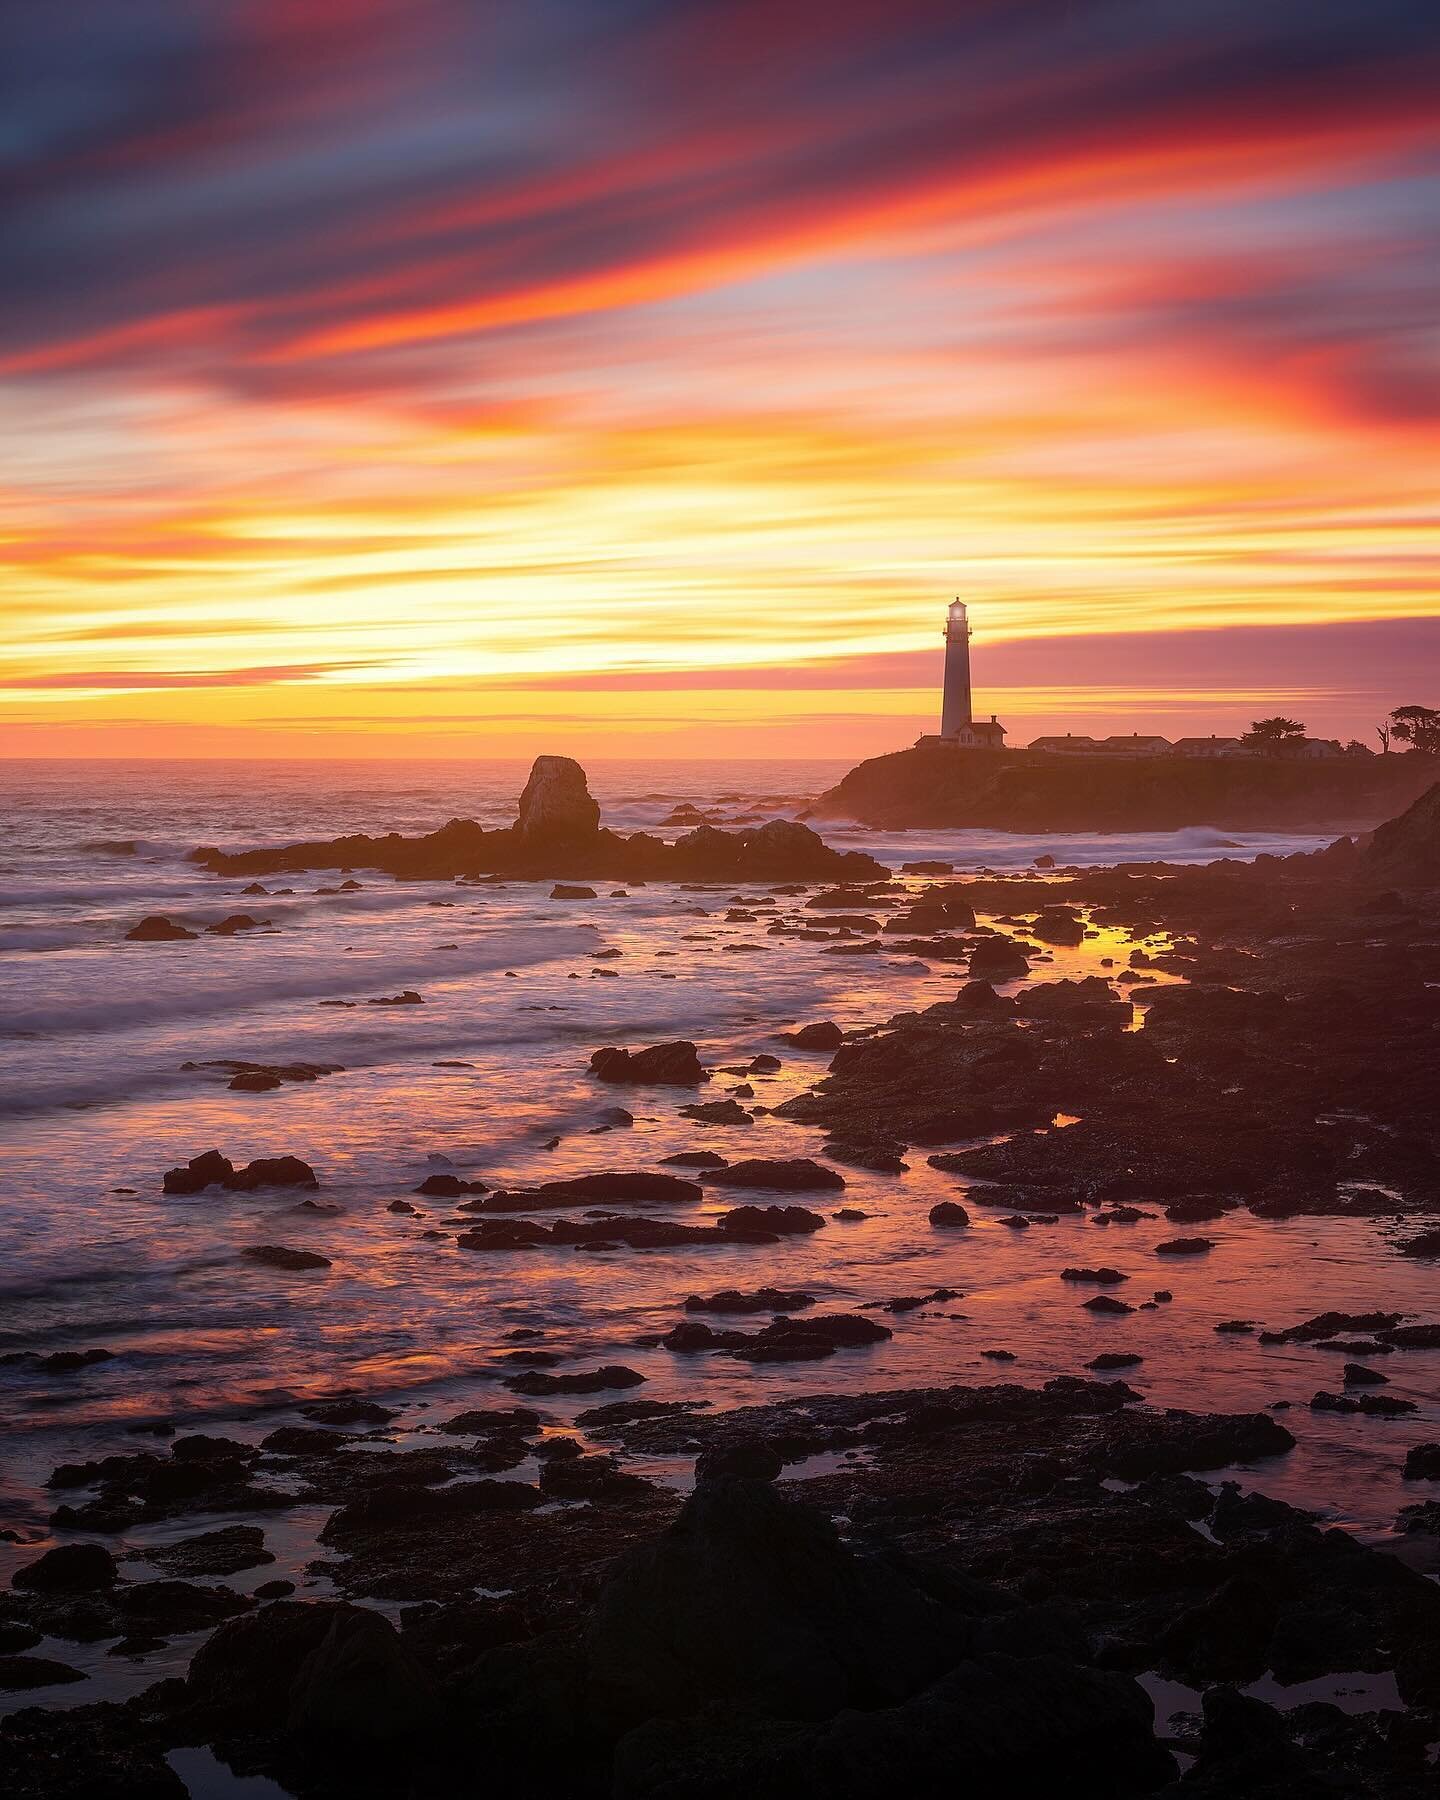 California Coast Sunset 🌅 

We only get a handful of these beautiful skies every year in California. Taking a picture of it should make it last alittle longer. 

📸 GFX 60mm
⭕️ @mavenfilters 

#californiasunset #sf #california #skycolors #withmedium